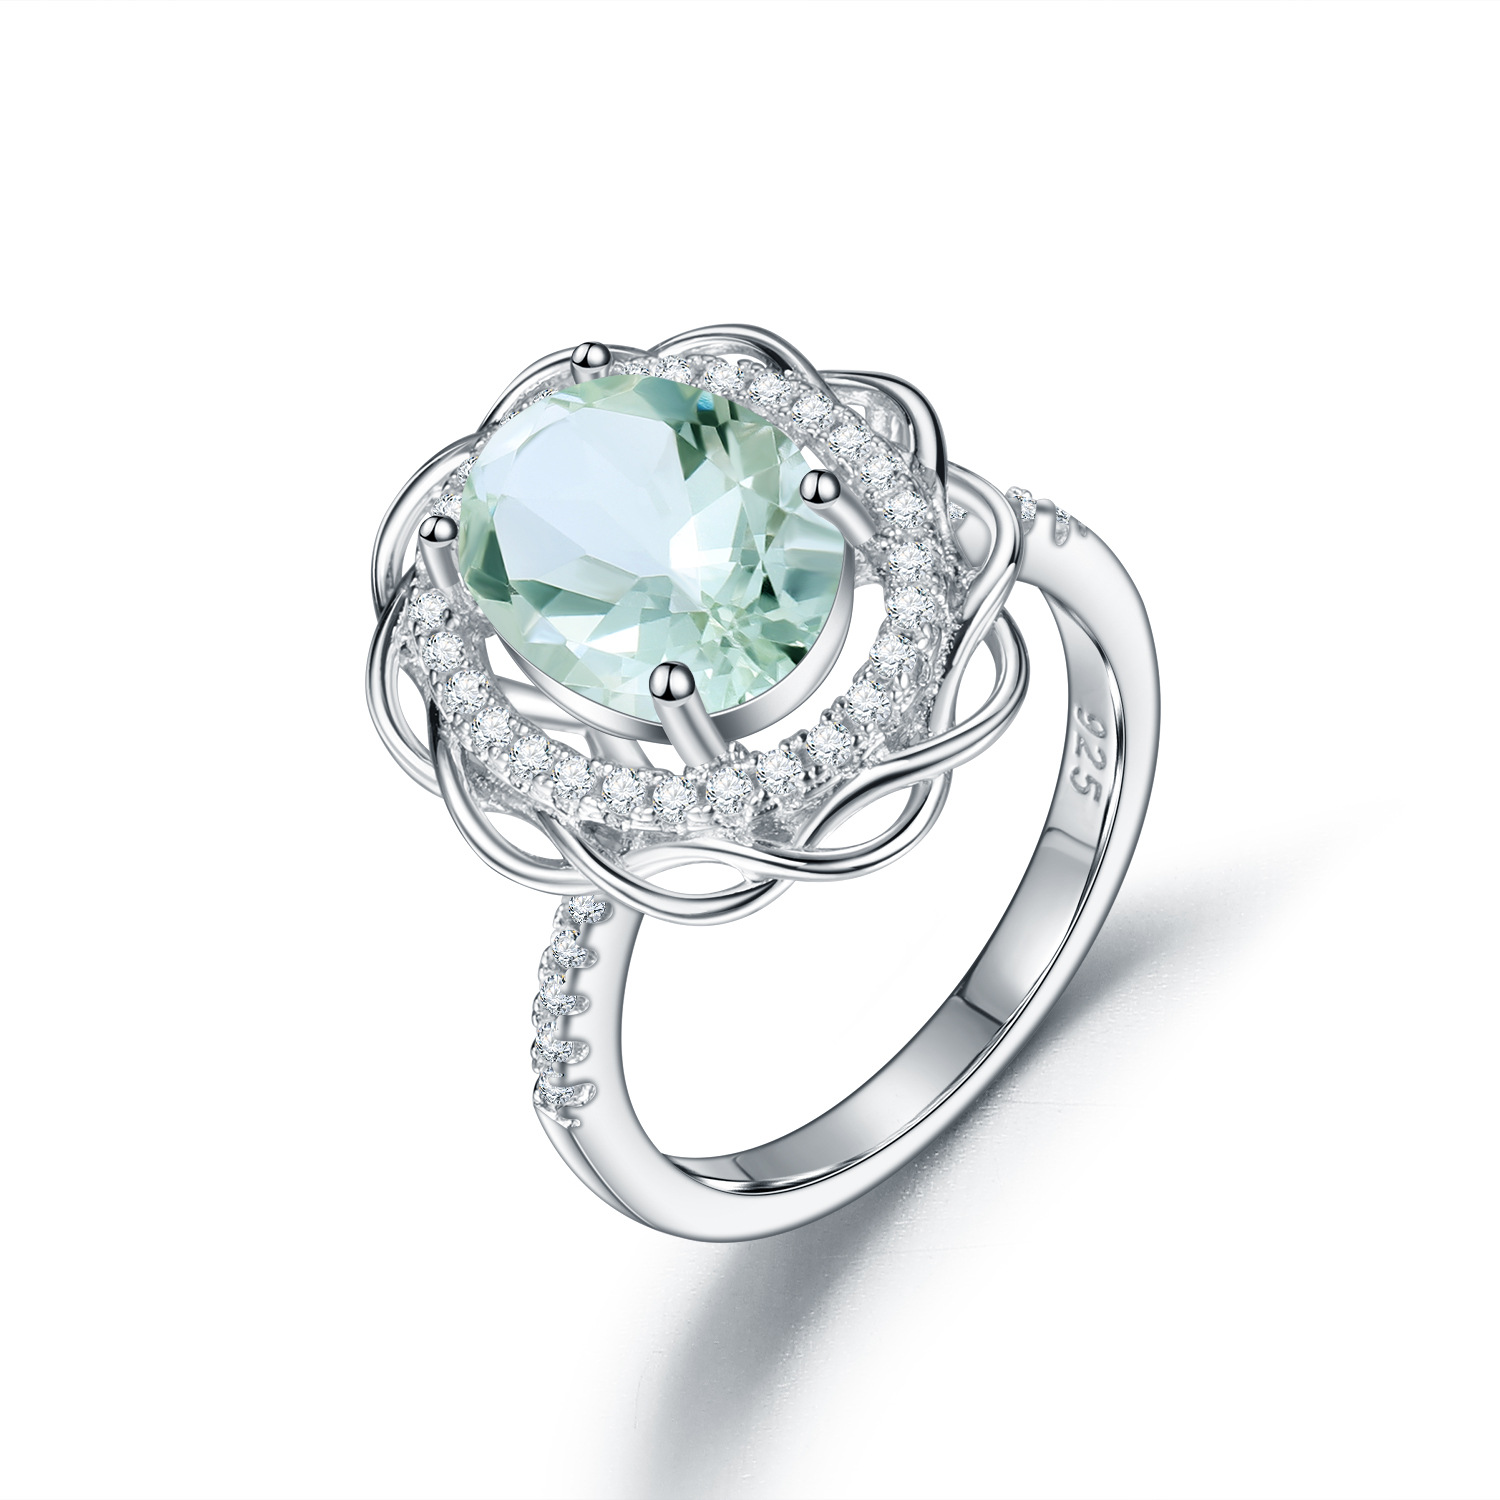 Sunflower Design S925 Sterling Silver Natural Green Amethyst Ring